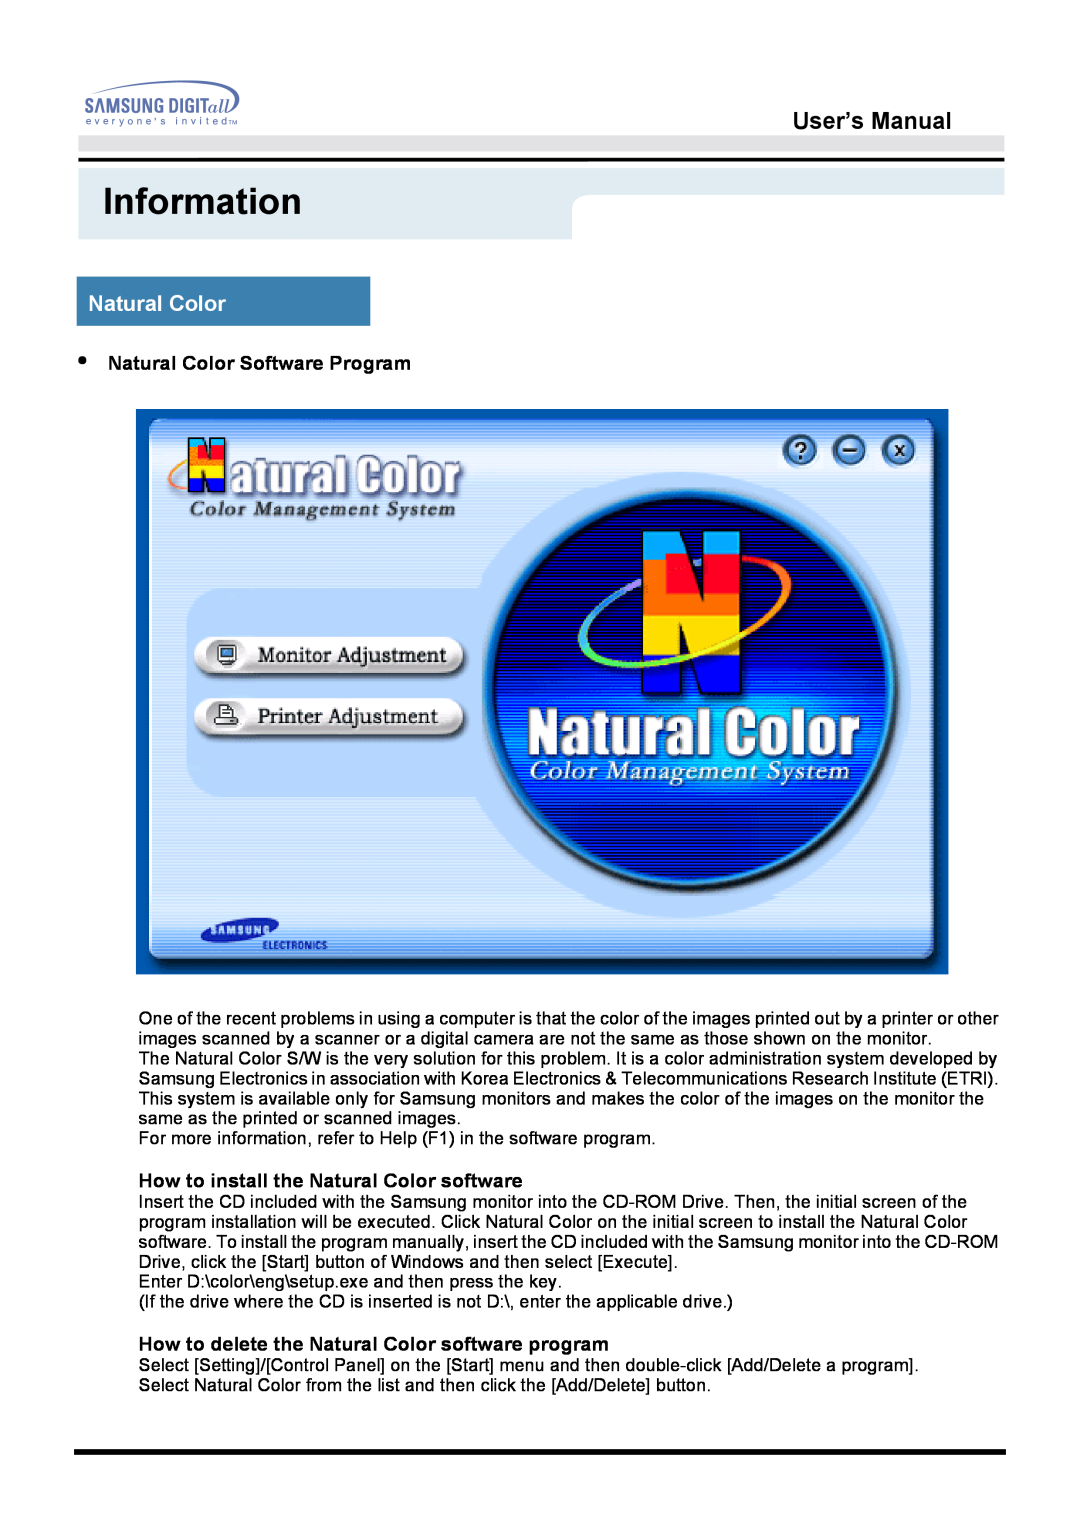 Samsung 172S Information, User’s Manual, Natural Color Software Program, How to install the Natural Color software 